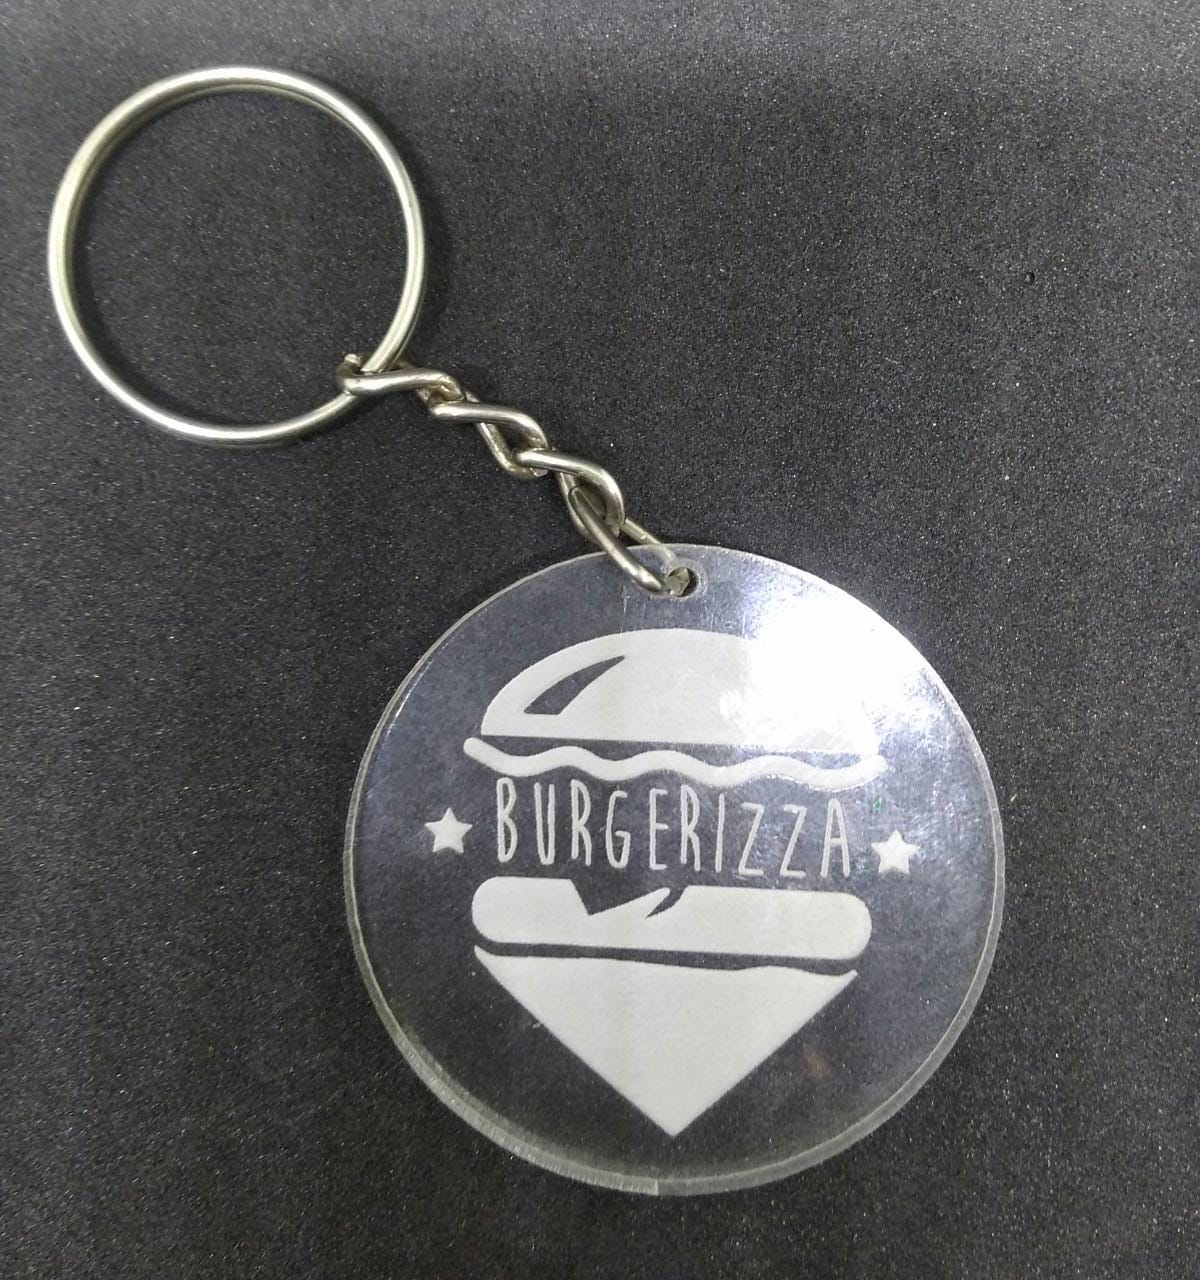 Adorn with Acrylic: Custom Acrylic Keychains and Stickers for a Modern Touch